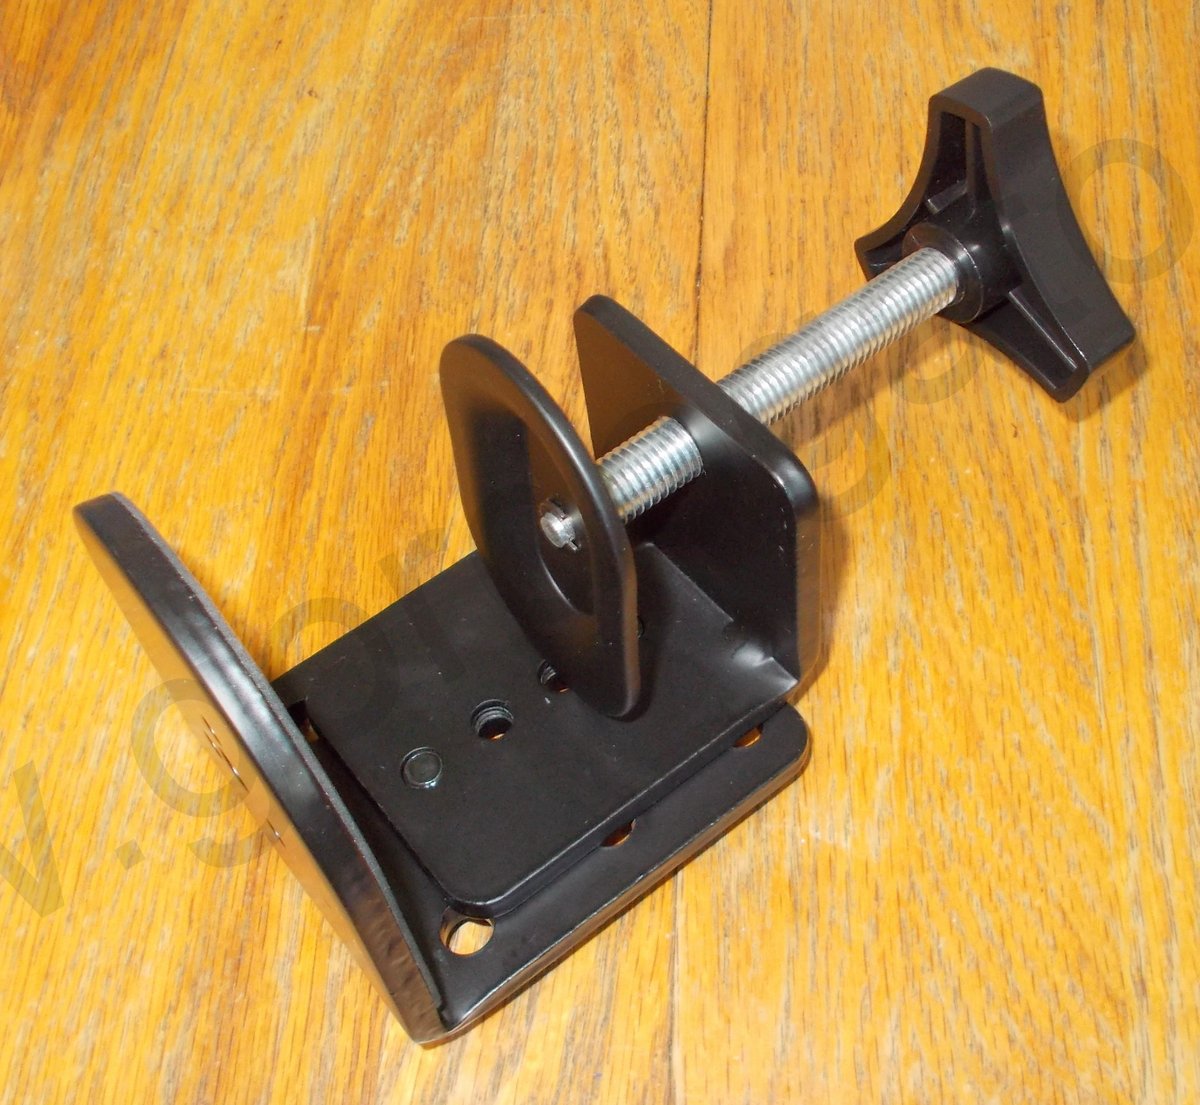 4" C-Clamp for Use With Wali Monitor Mounts